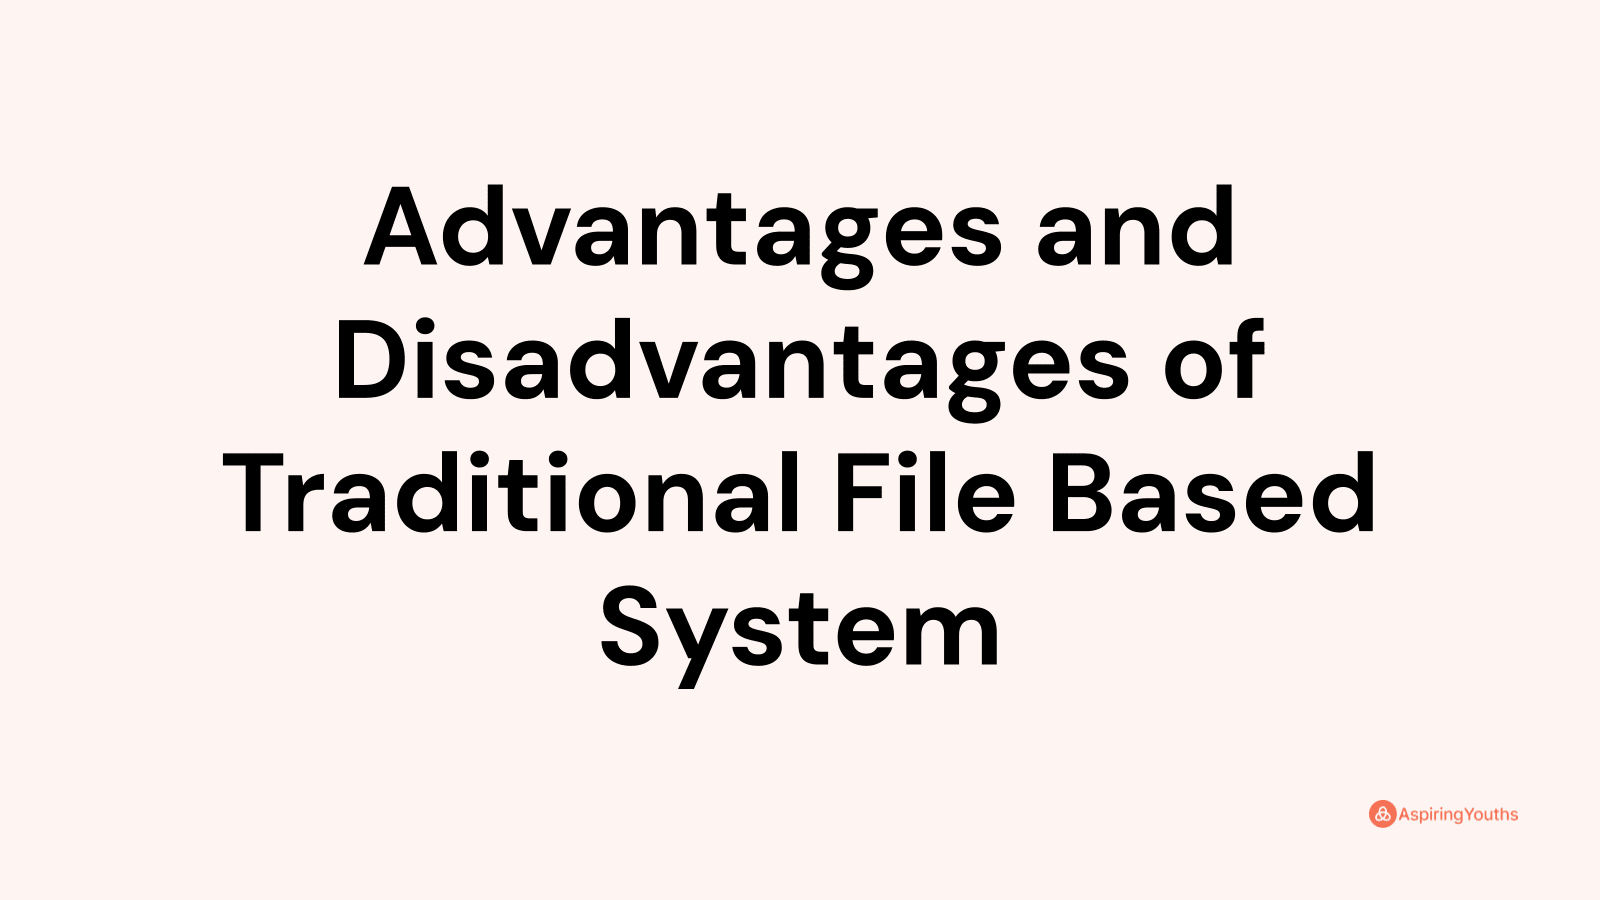 Advantages and disadvantages of Traditional File Based System